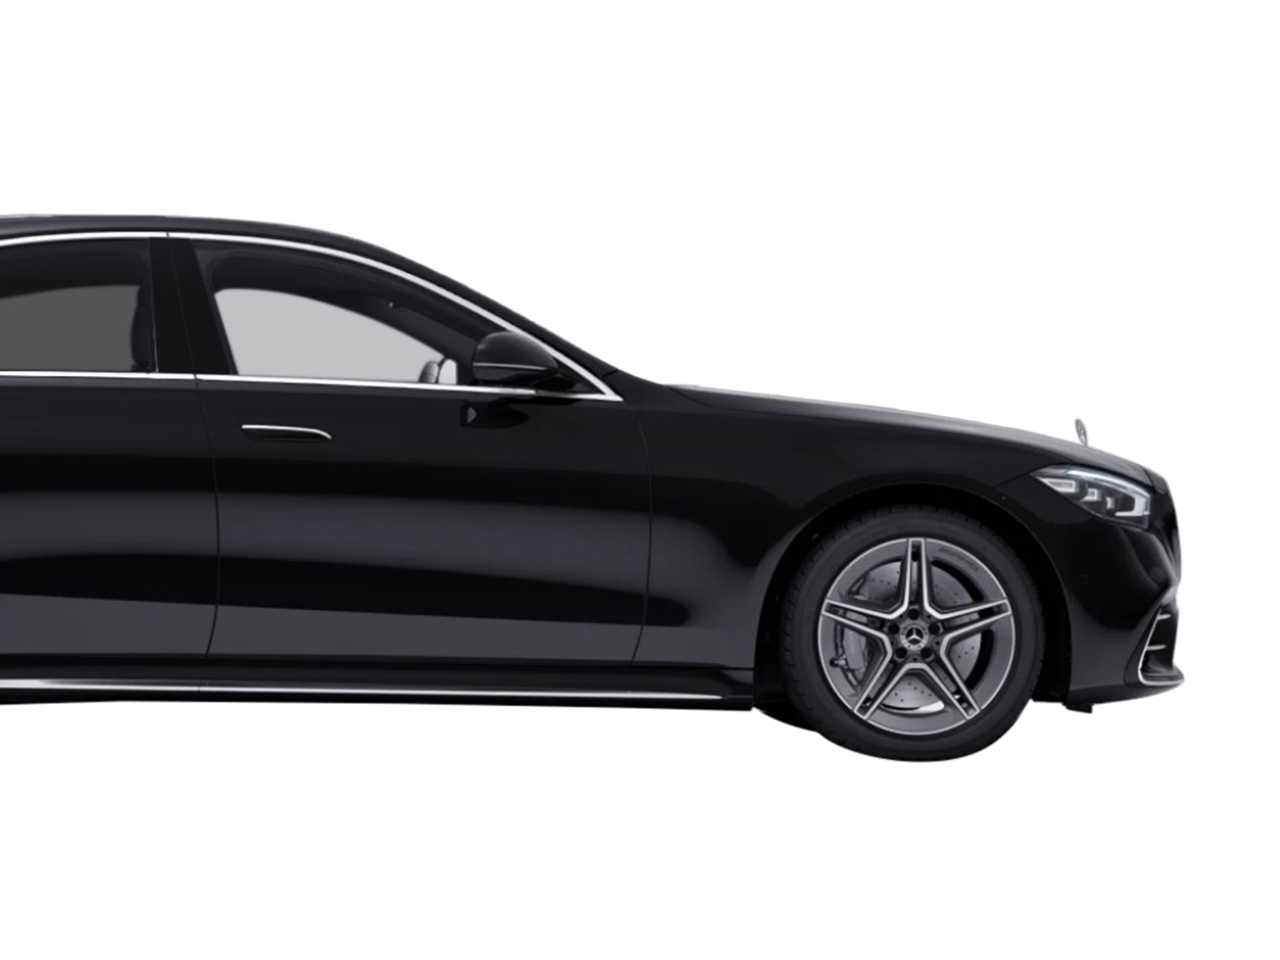 The Mercedes Benz S500 4 front